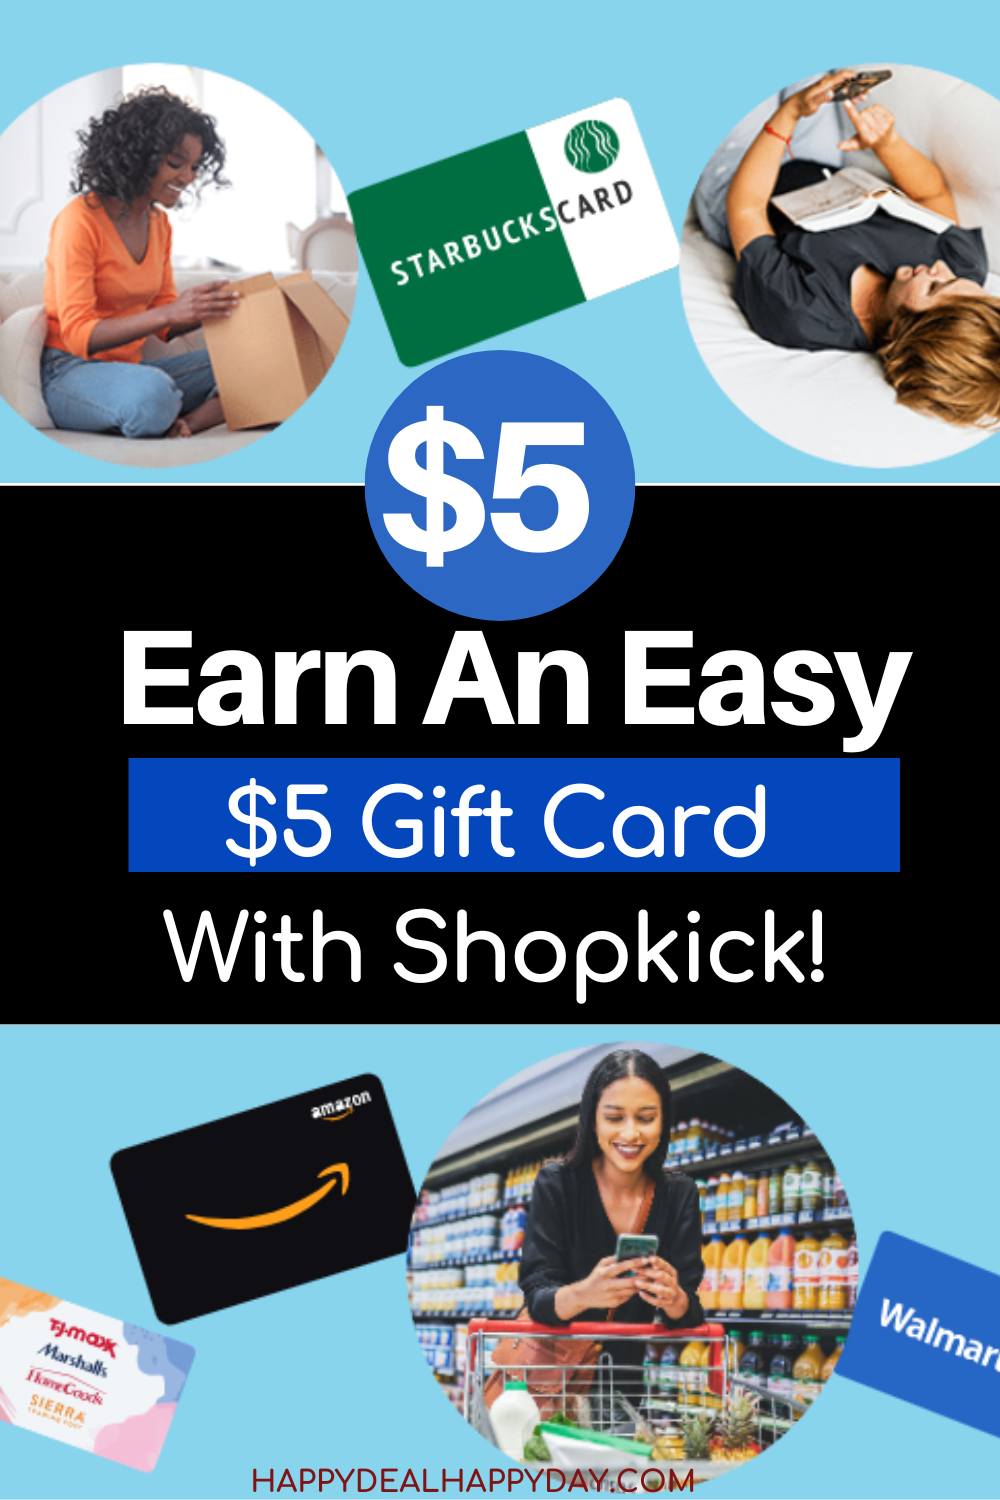 shopkick-reviews-how-does-it-work-to-get-5-gift-card-fast-happy